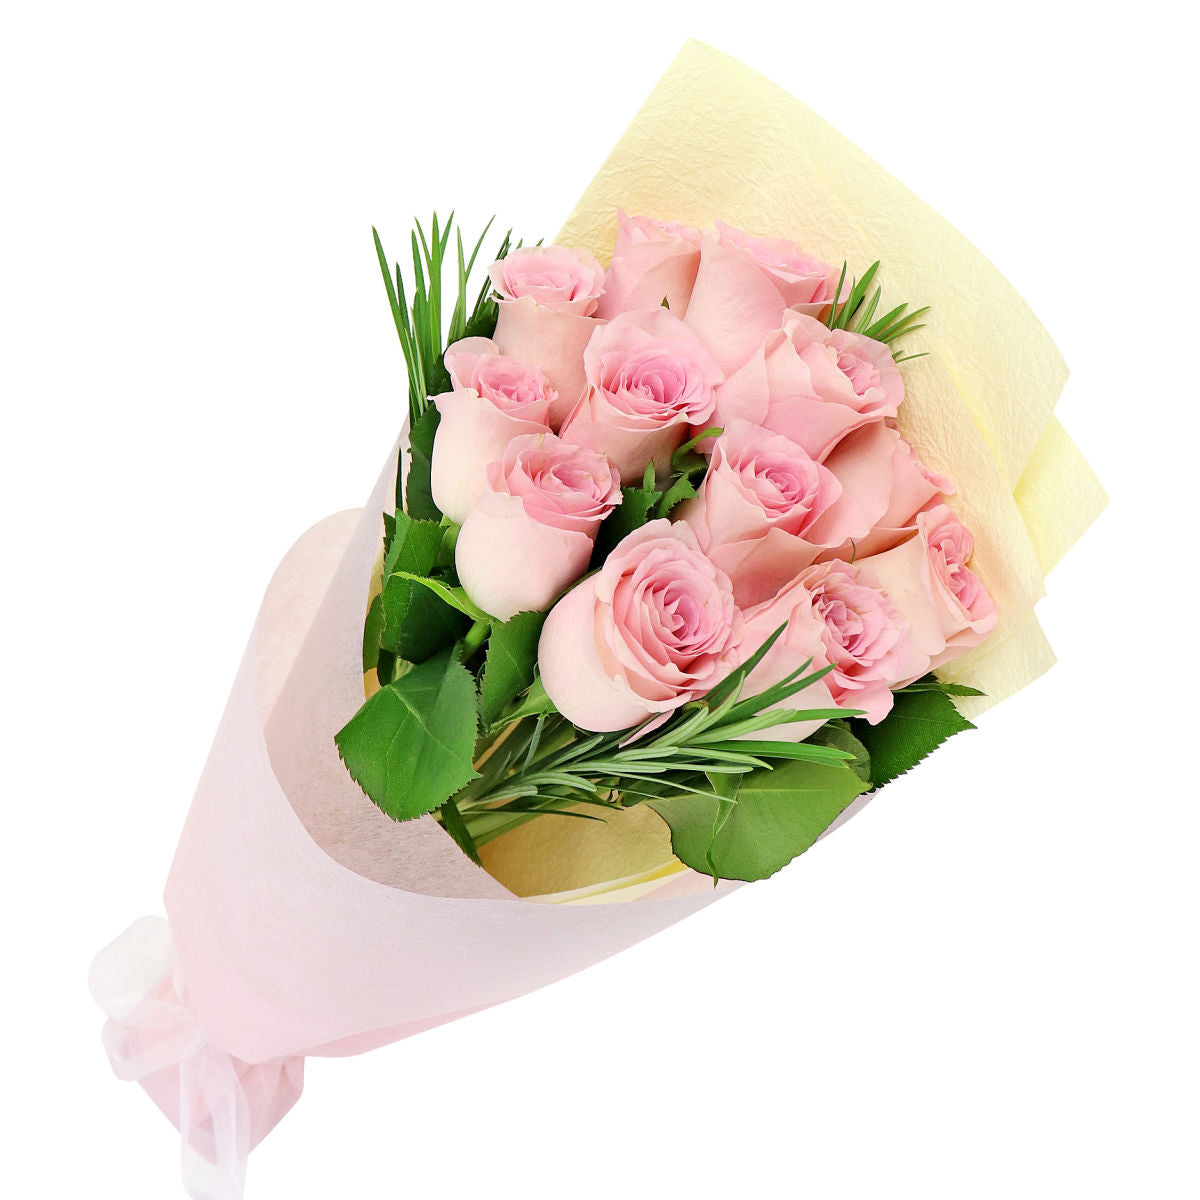 Soft Pink Roses (7432081604851)